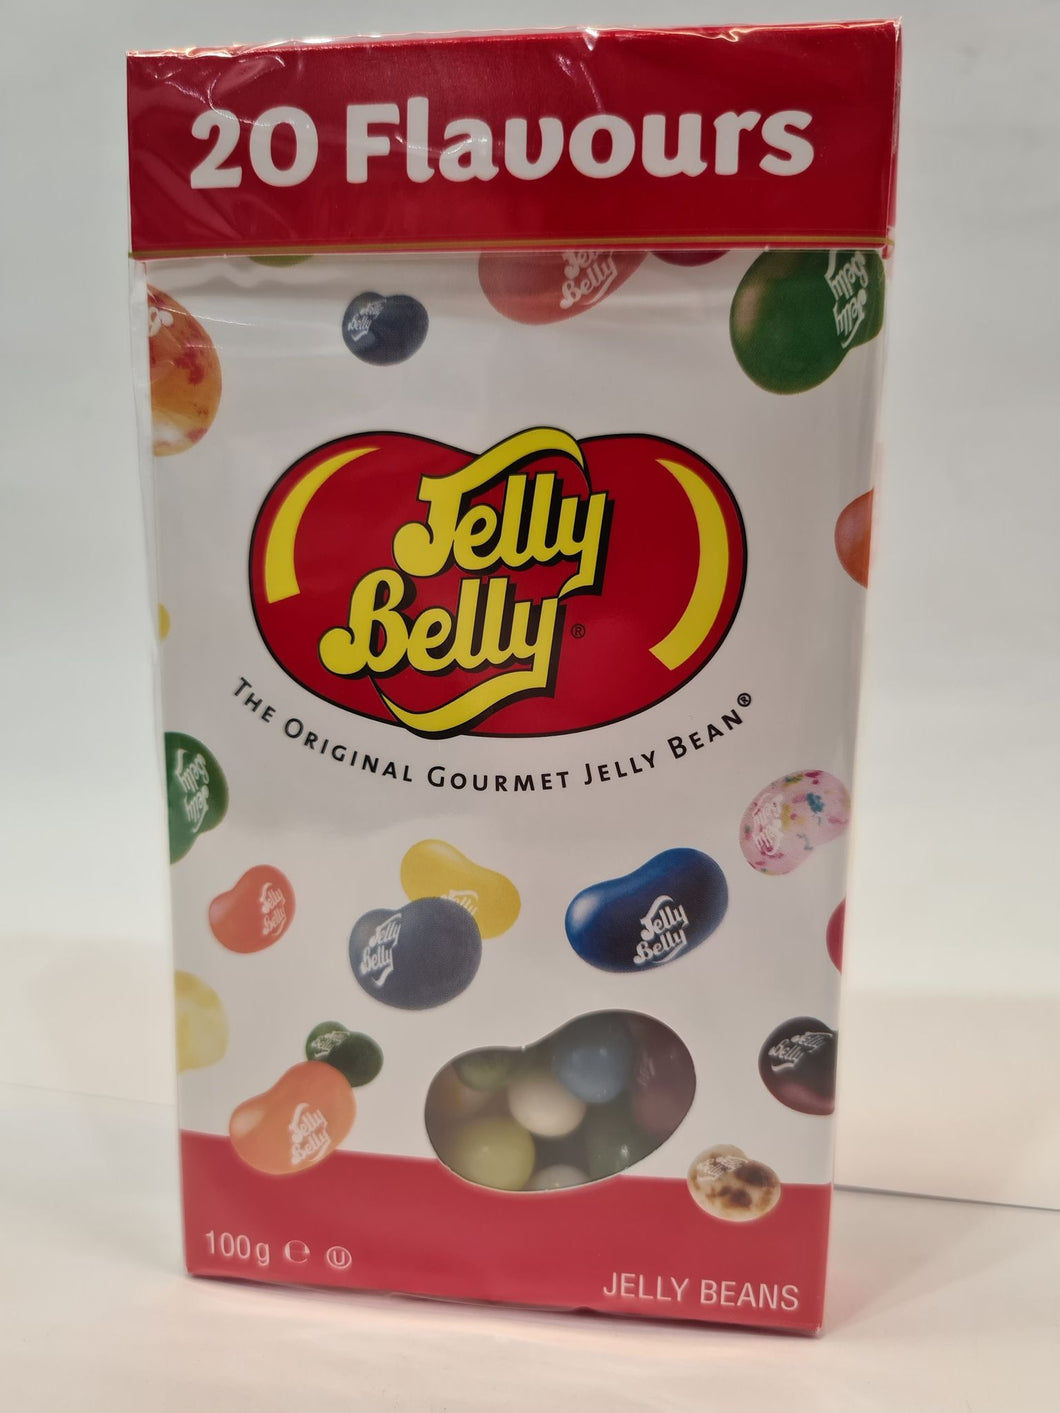 Jelly Belly 20 Flavours box